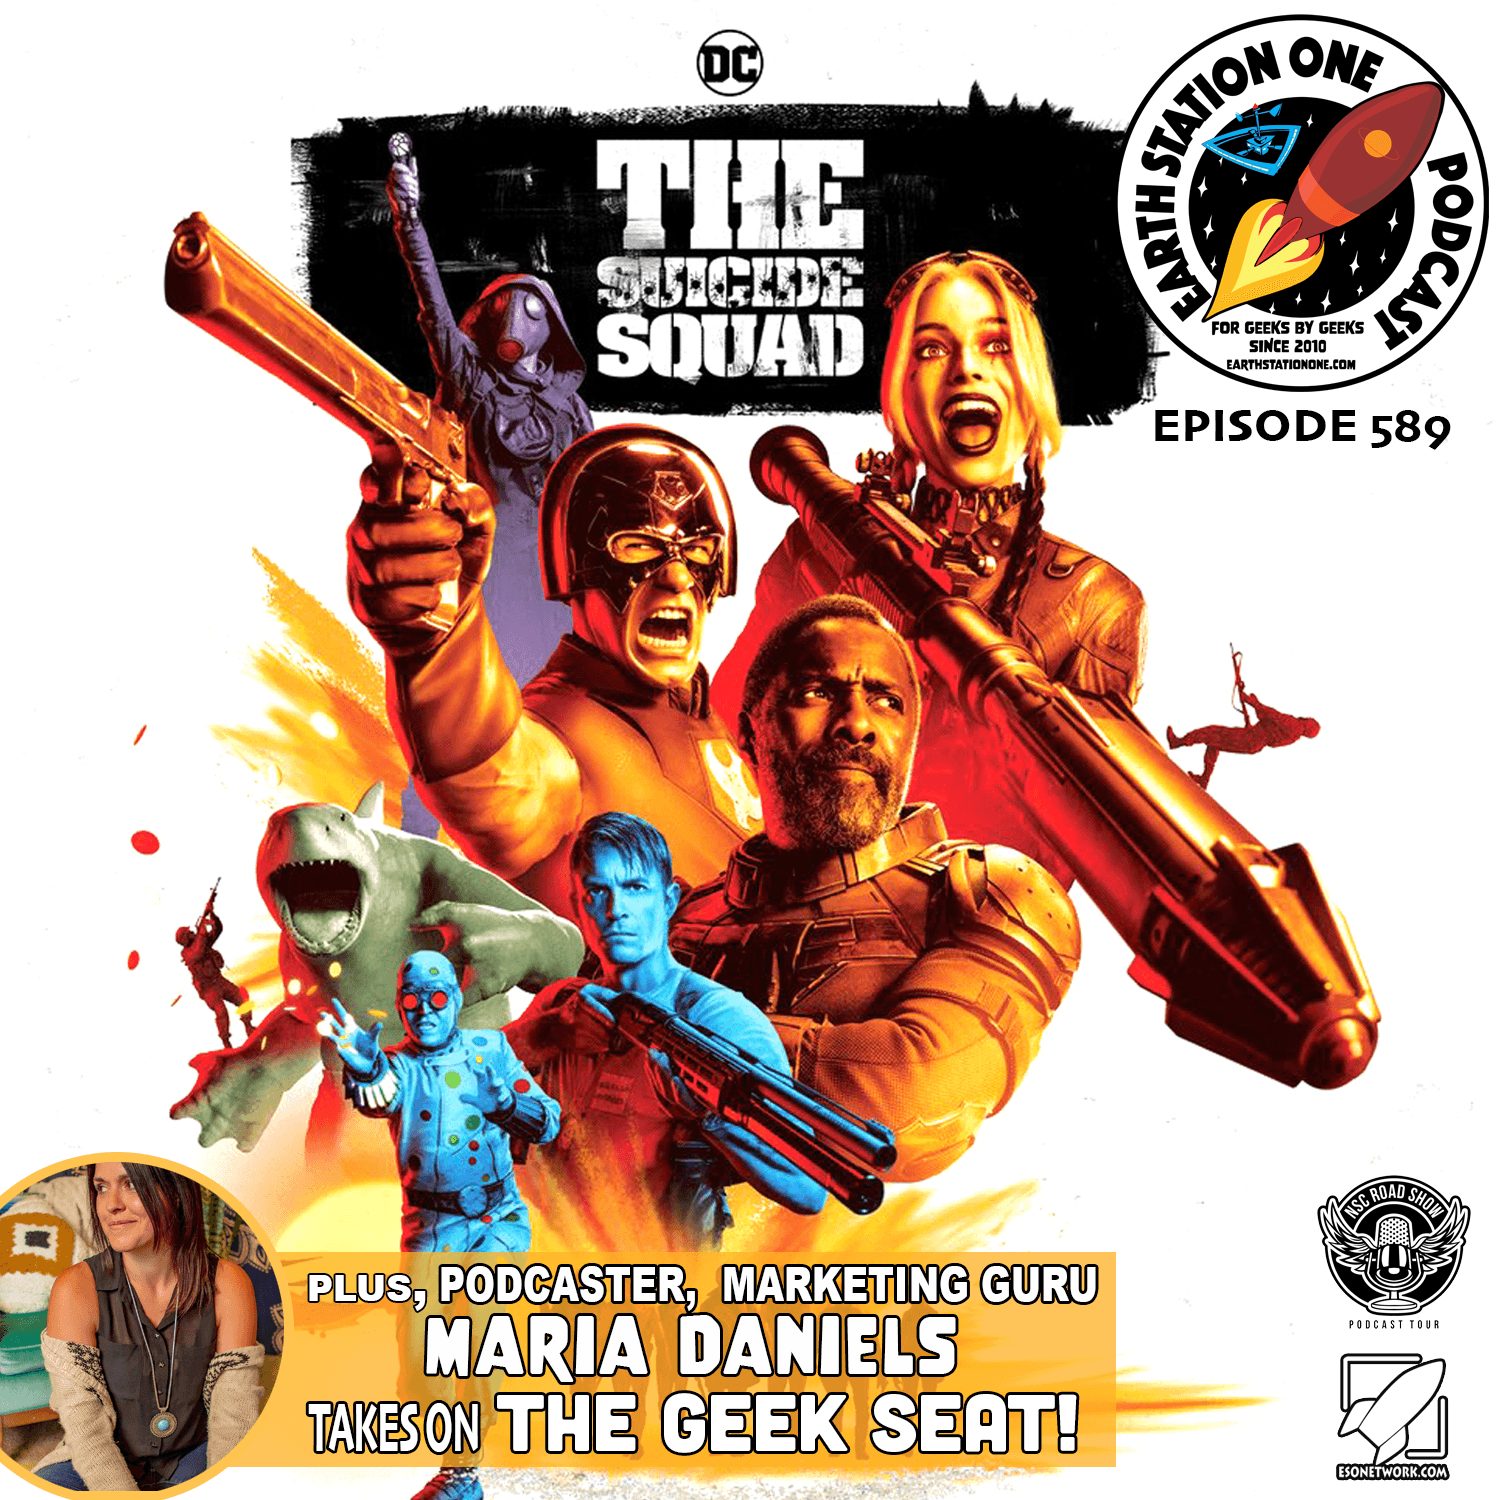 Earth Station One Ep 589 - Suicide Squad